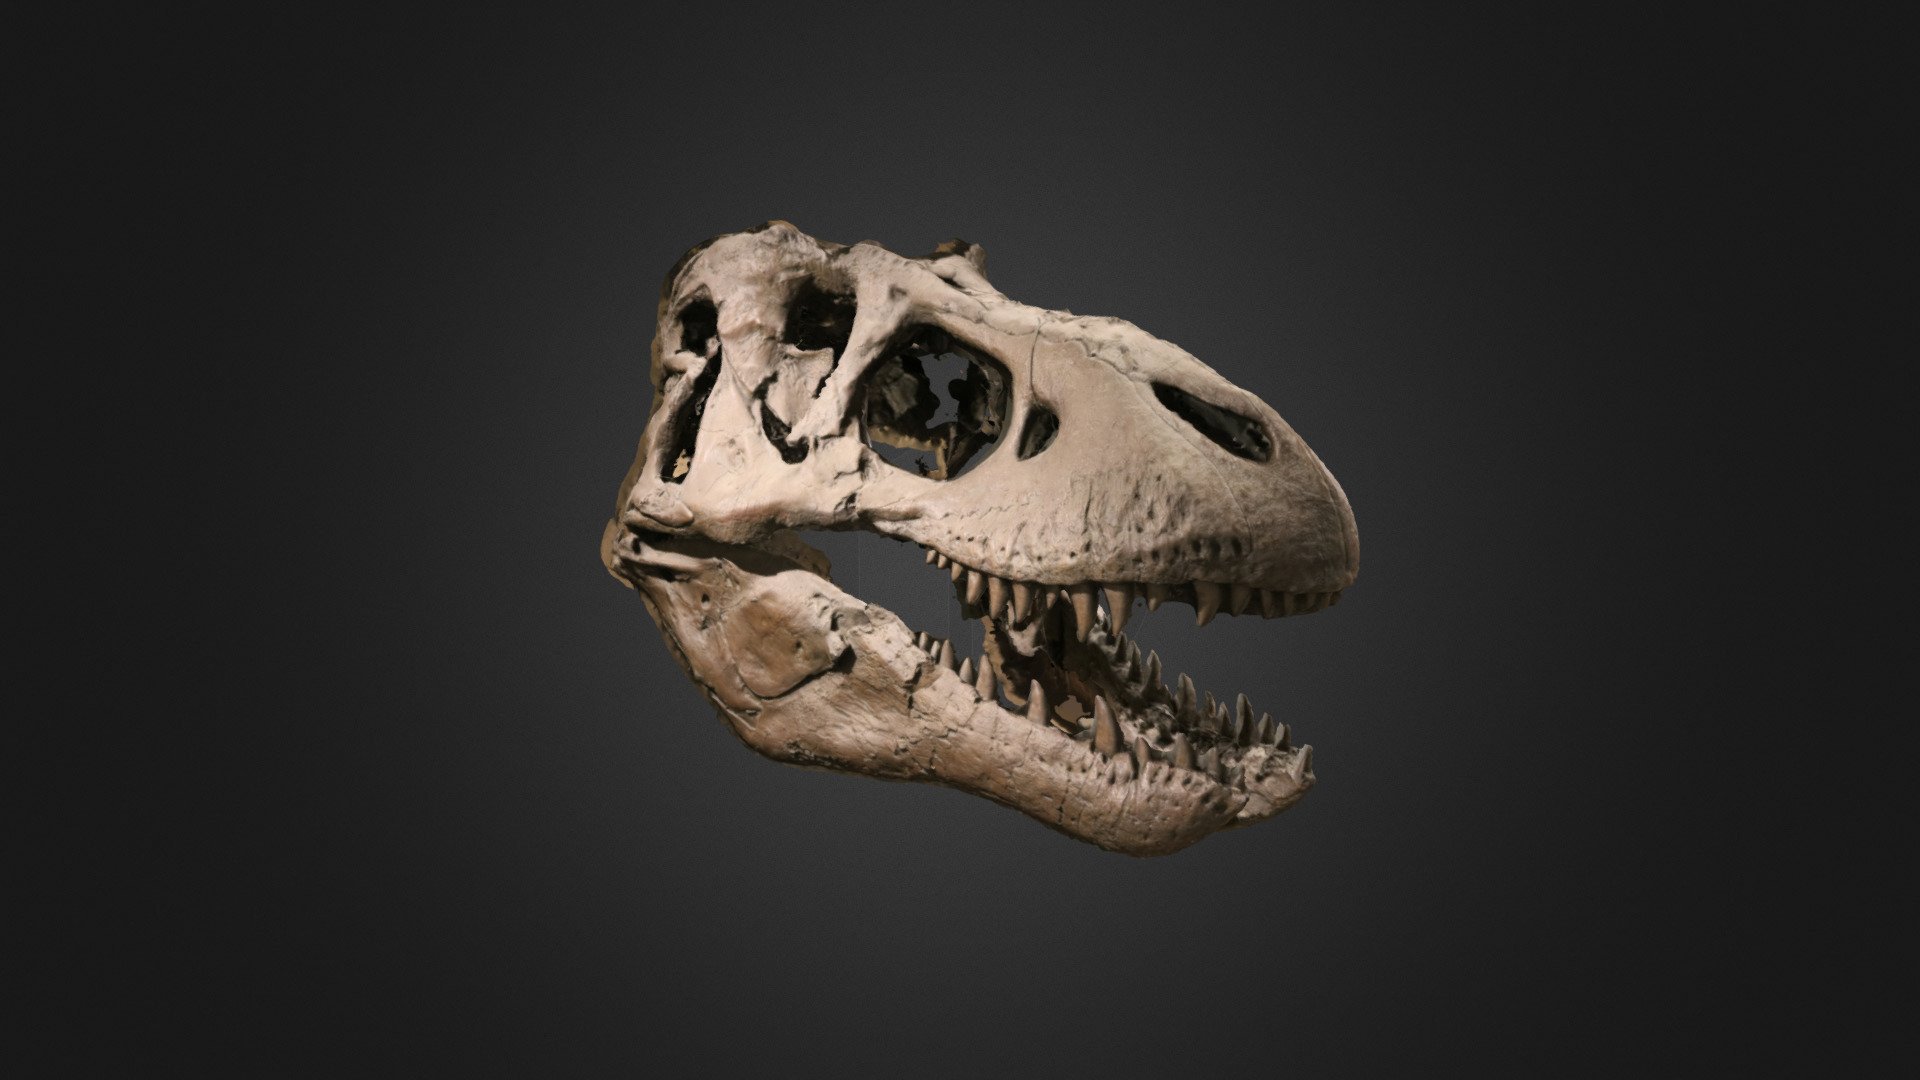 Specimen is an artificial cast of a Tyrannosaurus rex skull on display at the Museum of the Earth, Ithaca, New York. Model by Emily Hauf 3d model